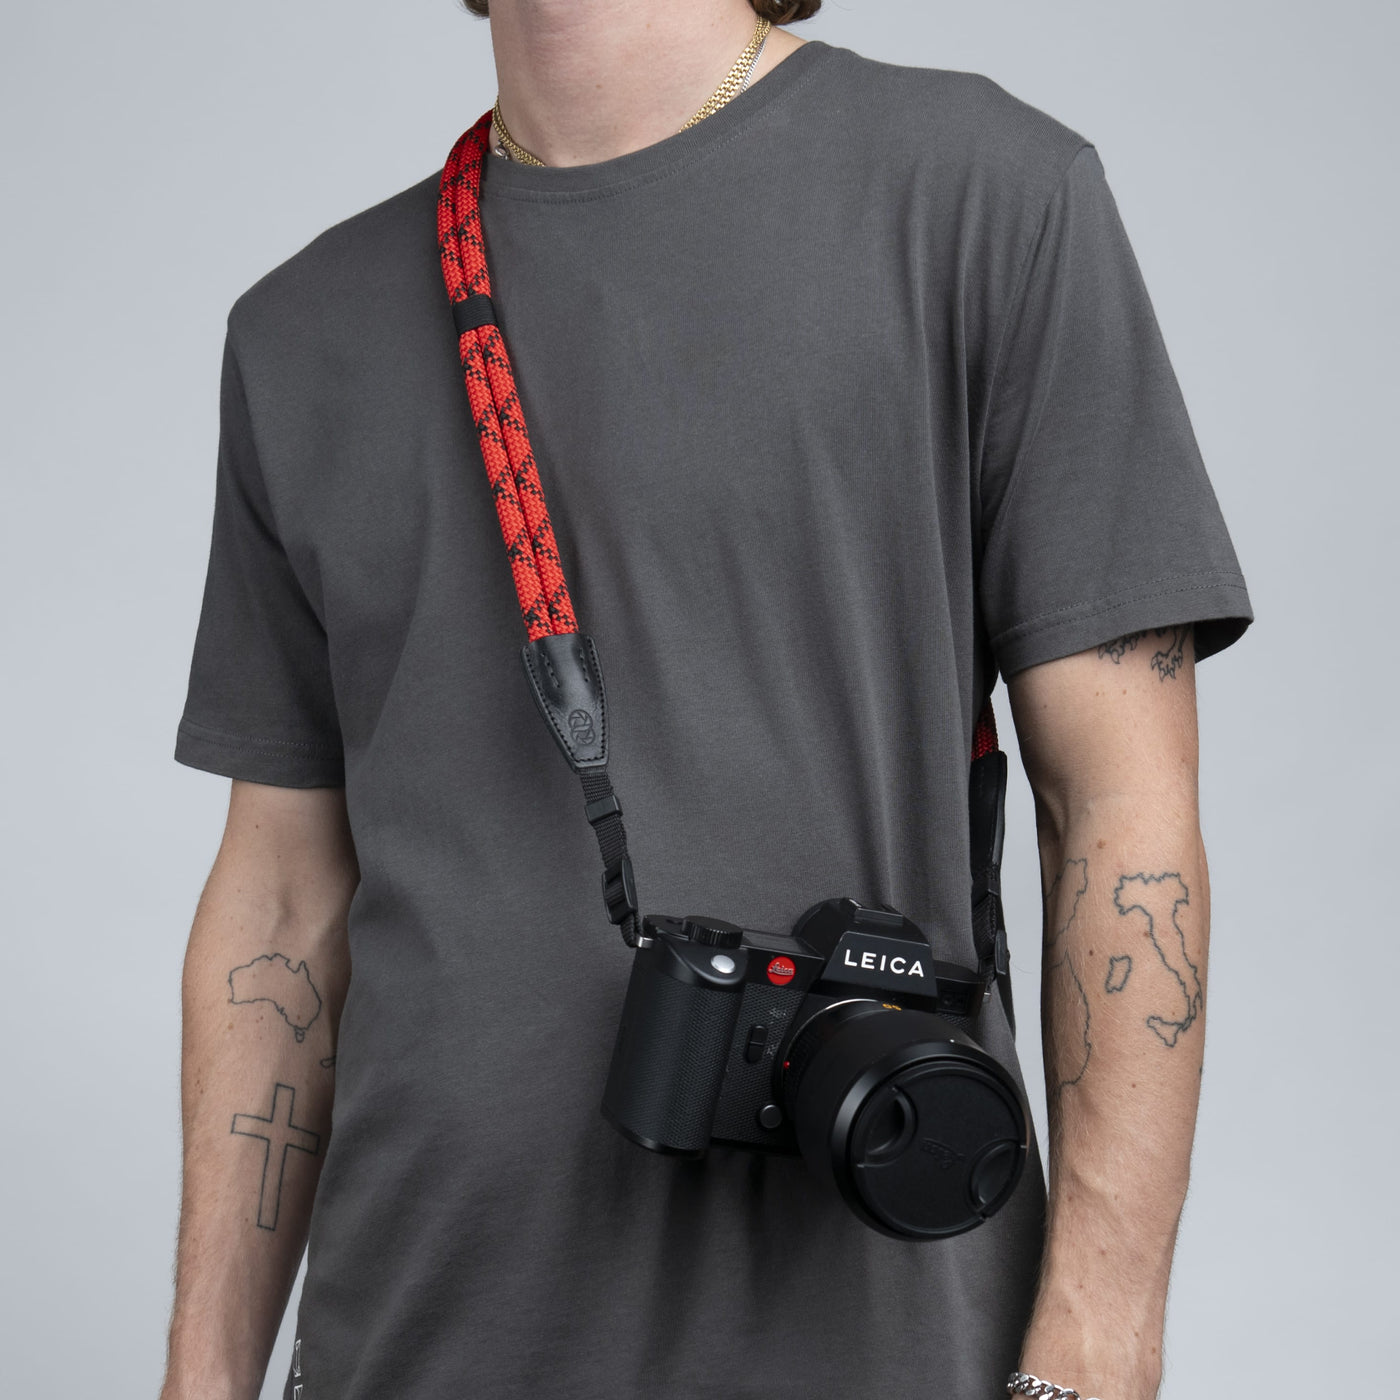 Leica camera on a photographer's hip held with red double rope strap 